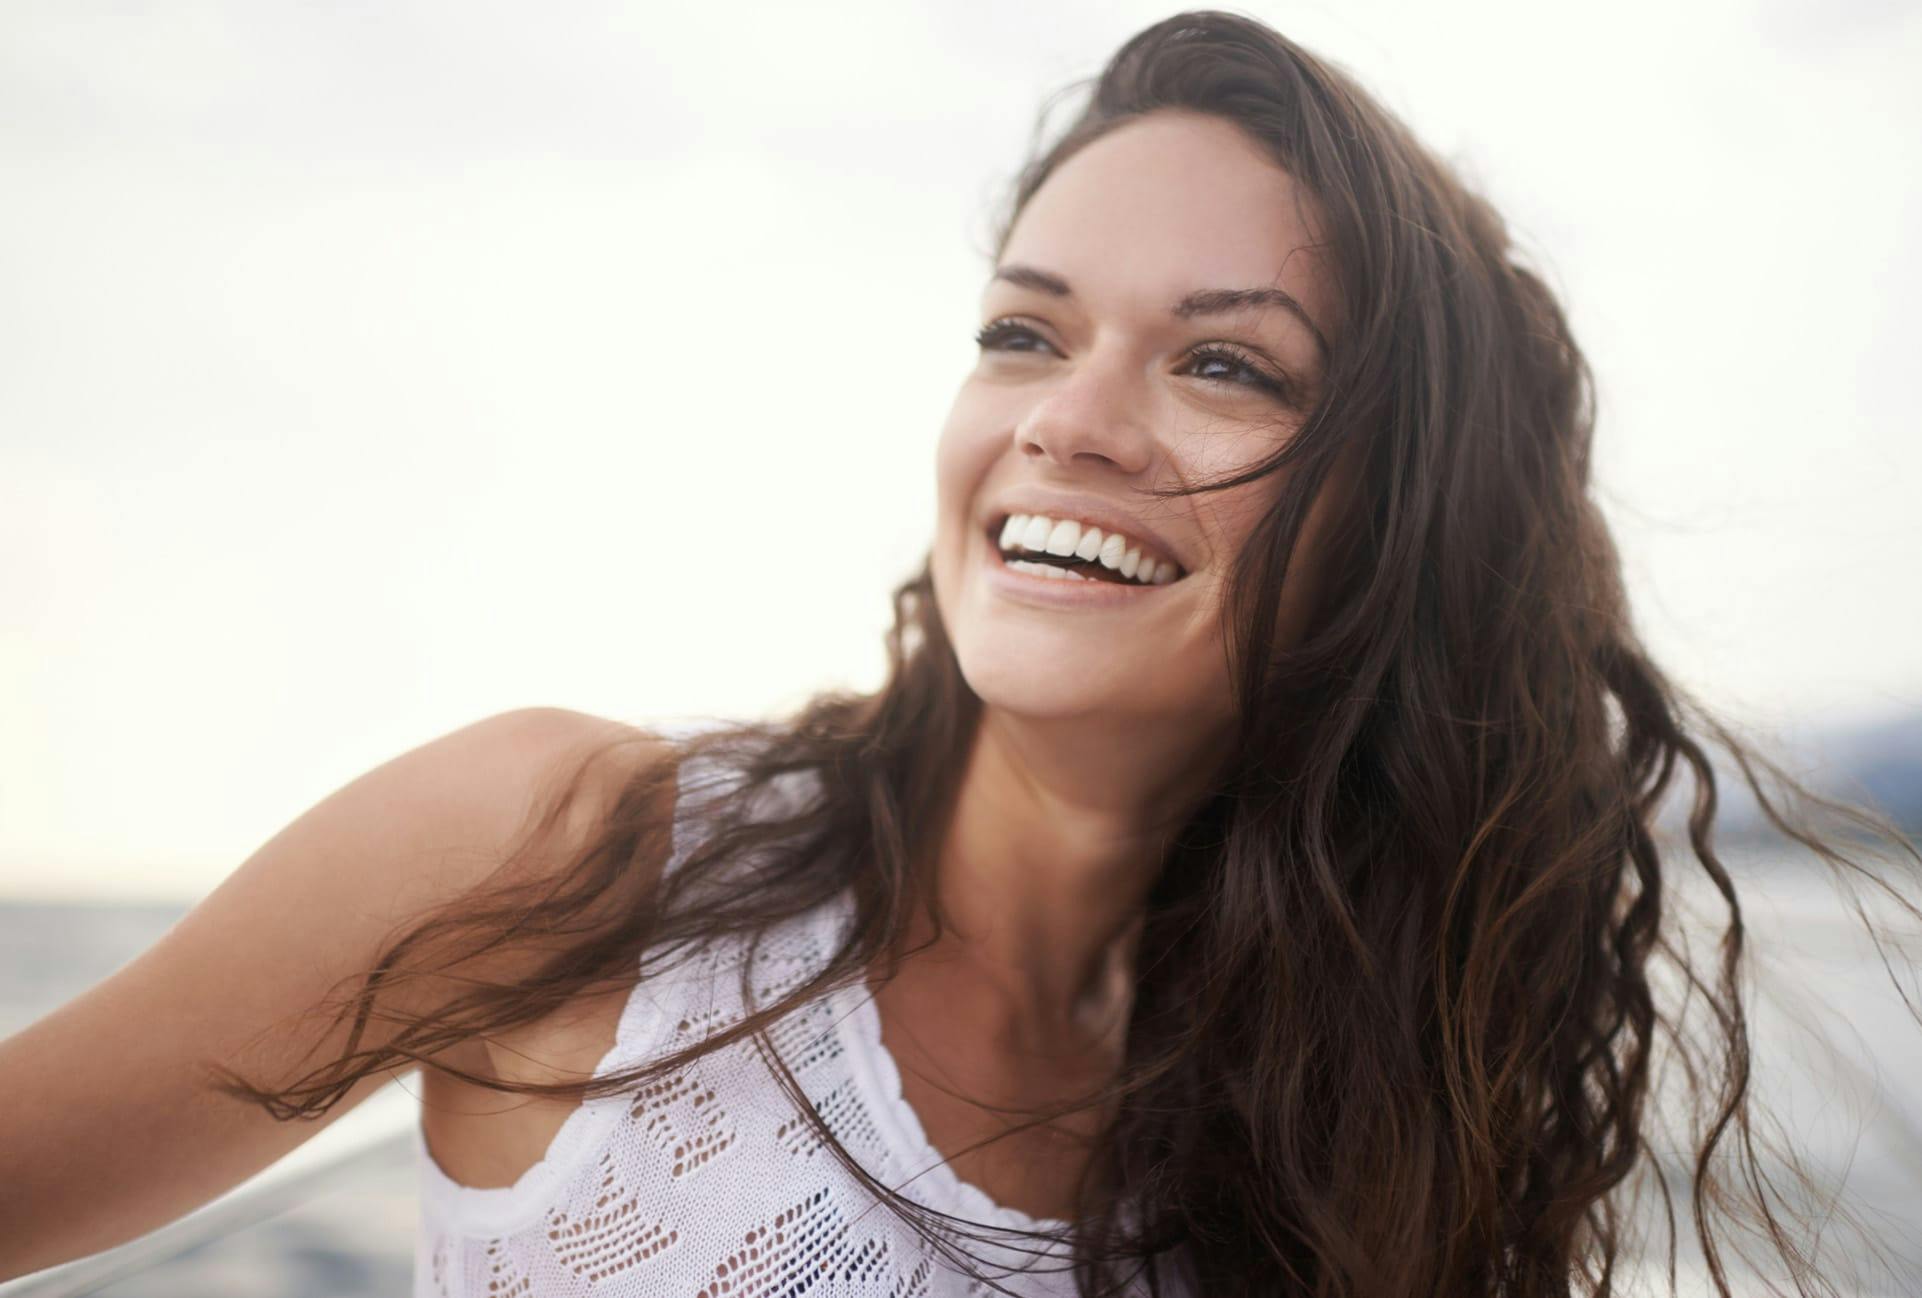 Woman with wavy dark hair smiling on the beach